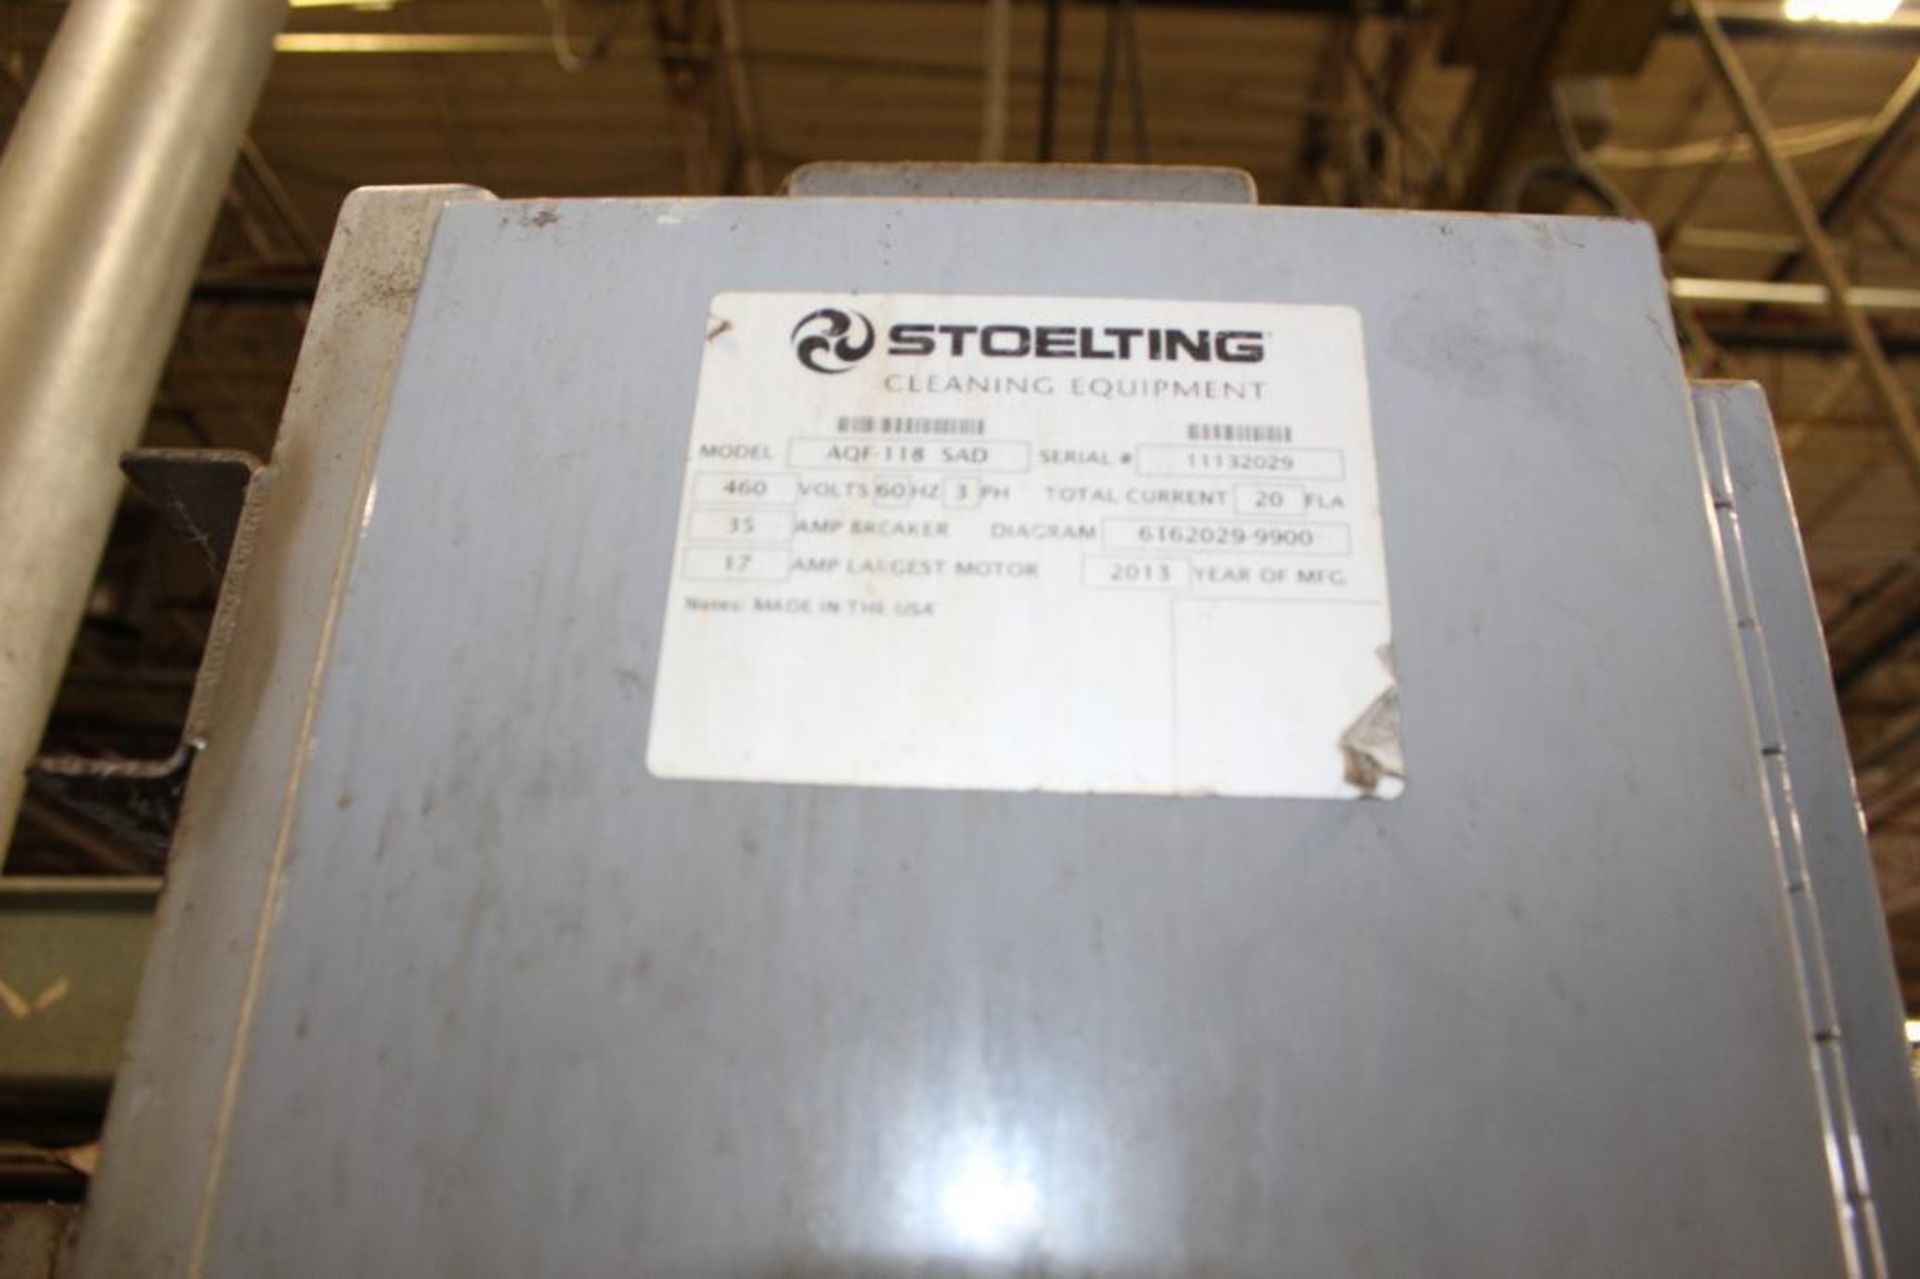 2013 Stoelting Model: AQF-118 Aquaforce 3-Stage Stainless Steel Conveyor Type Heated Dryer - Image 5 of 6